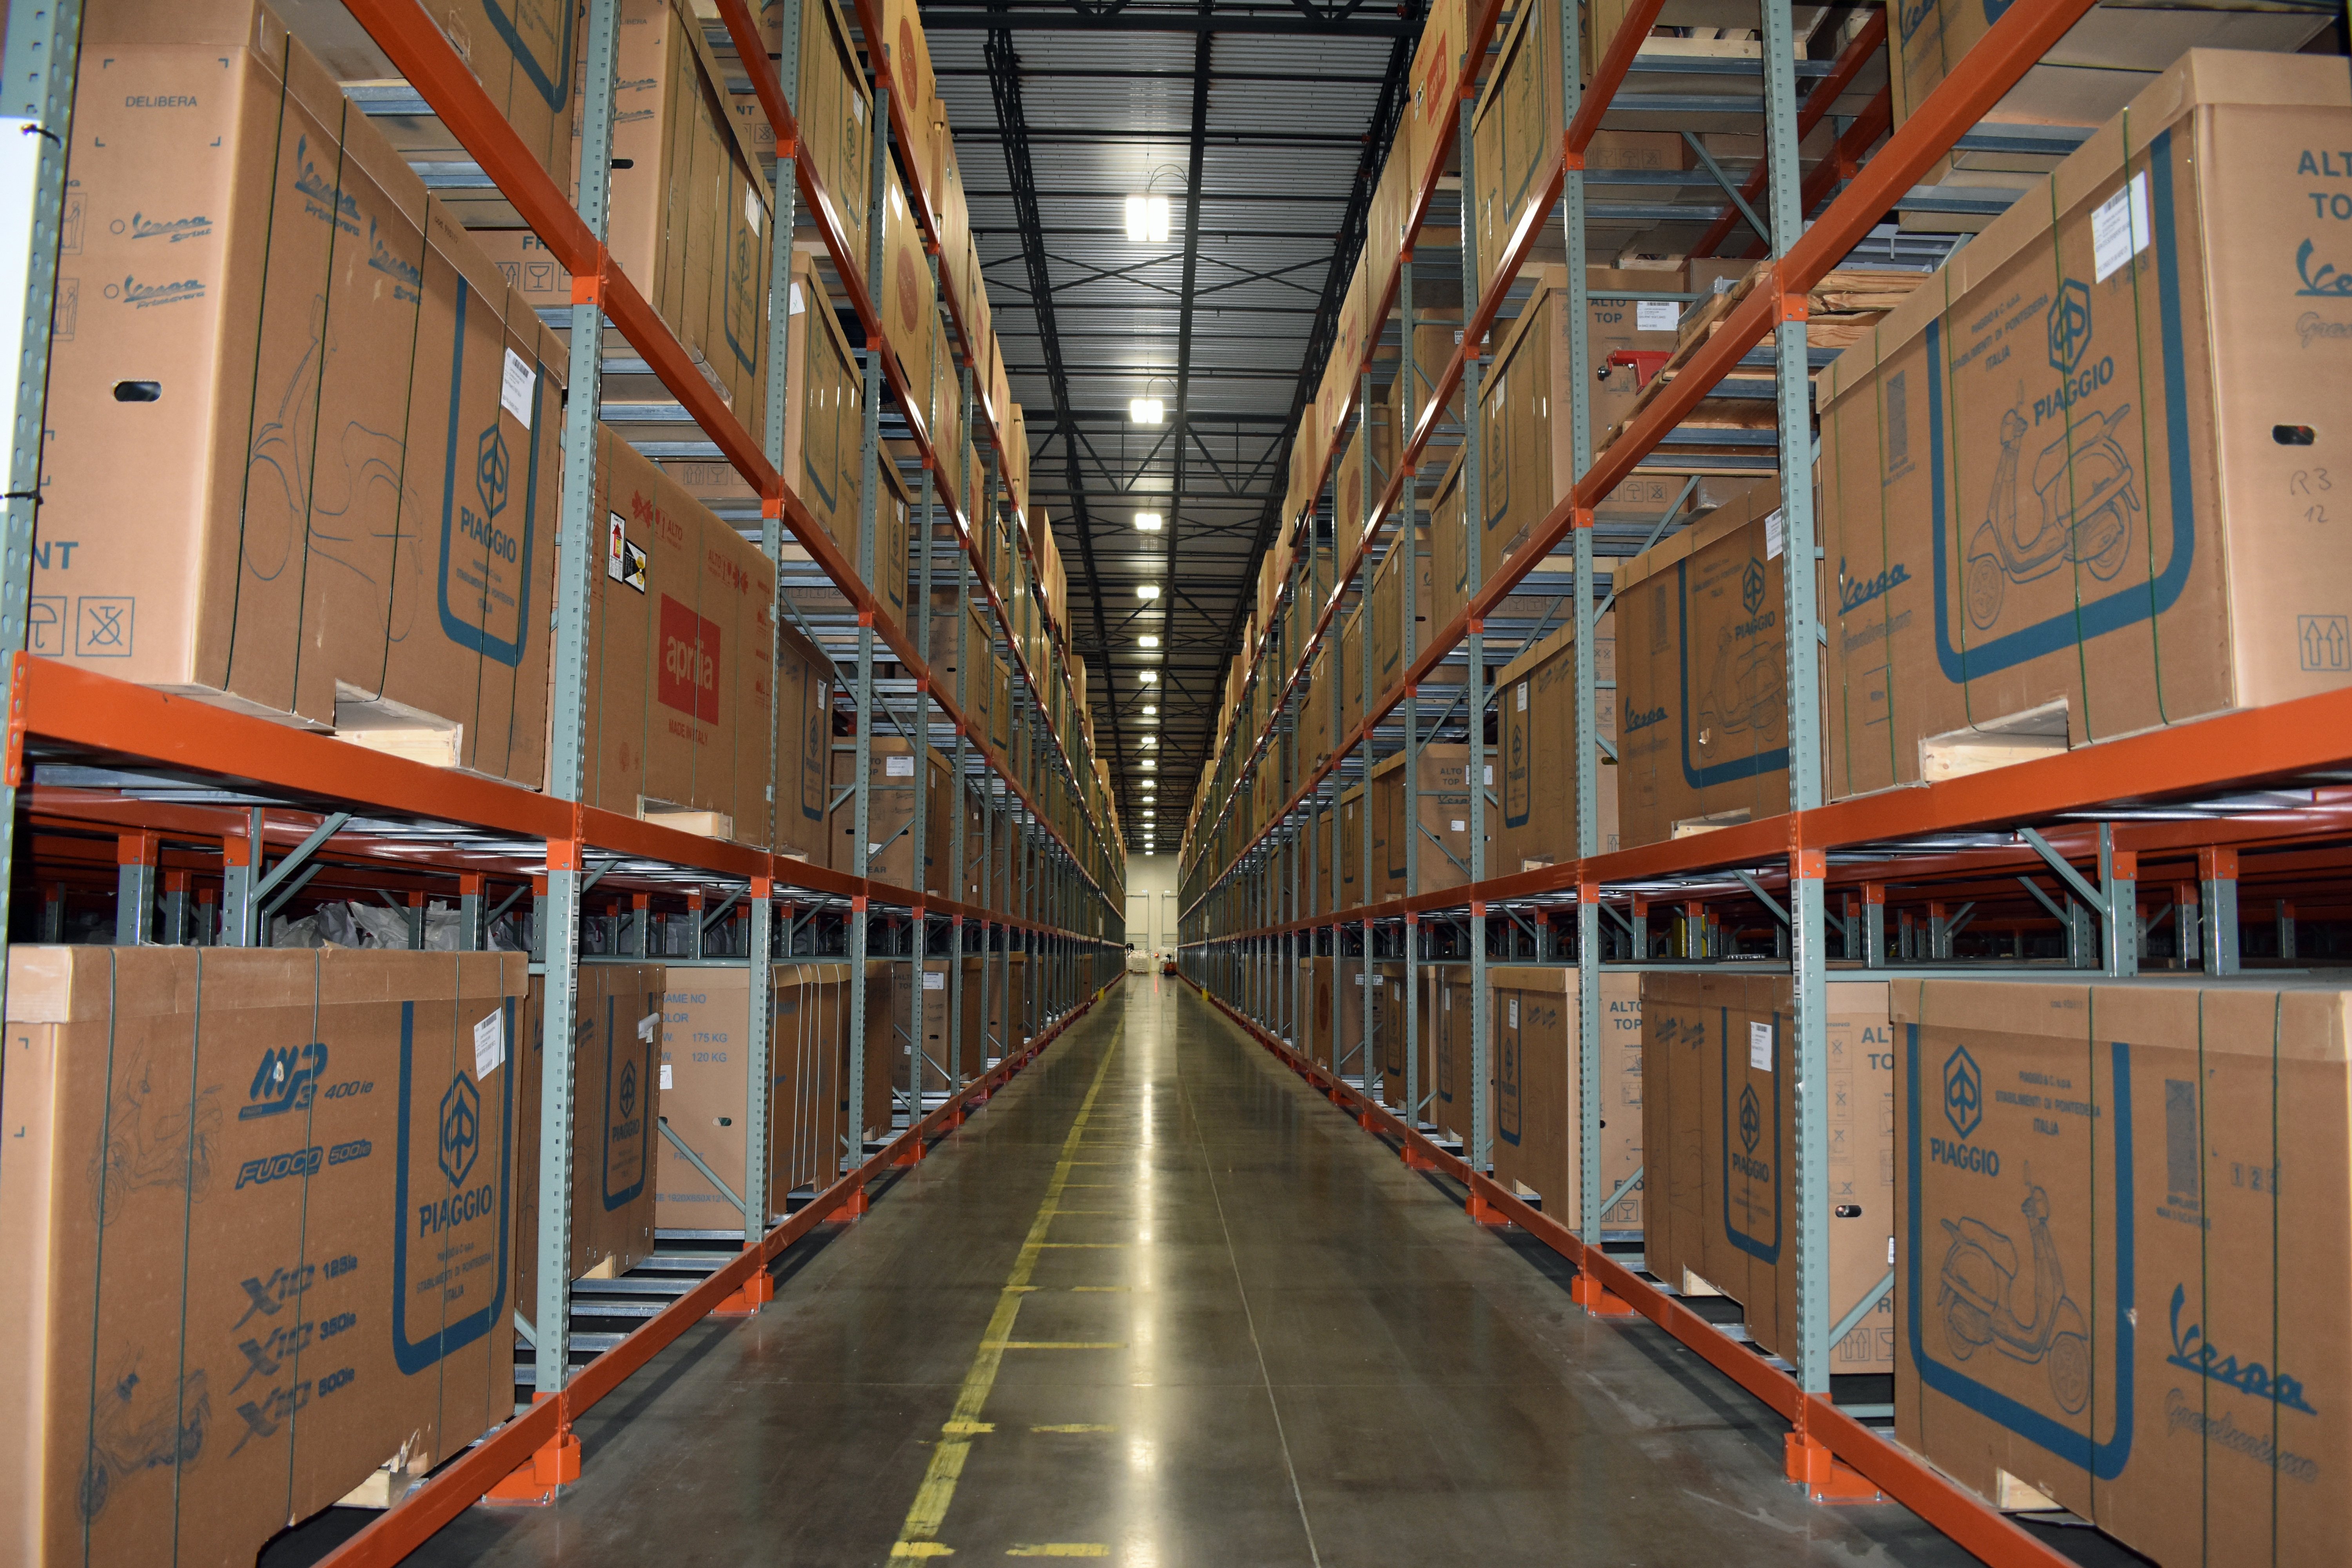 The Shippers Group Wintergreen facility stacked from floor to ceiling with uniform boxes of product neatly arranged in rows on racks